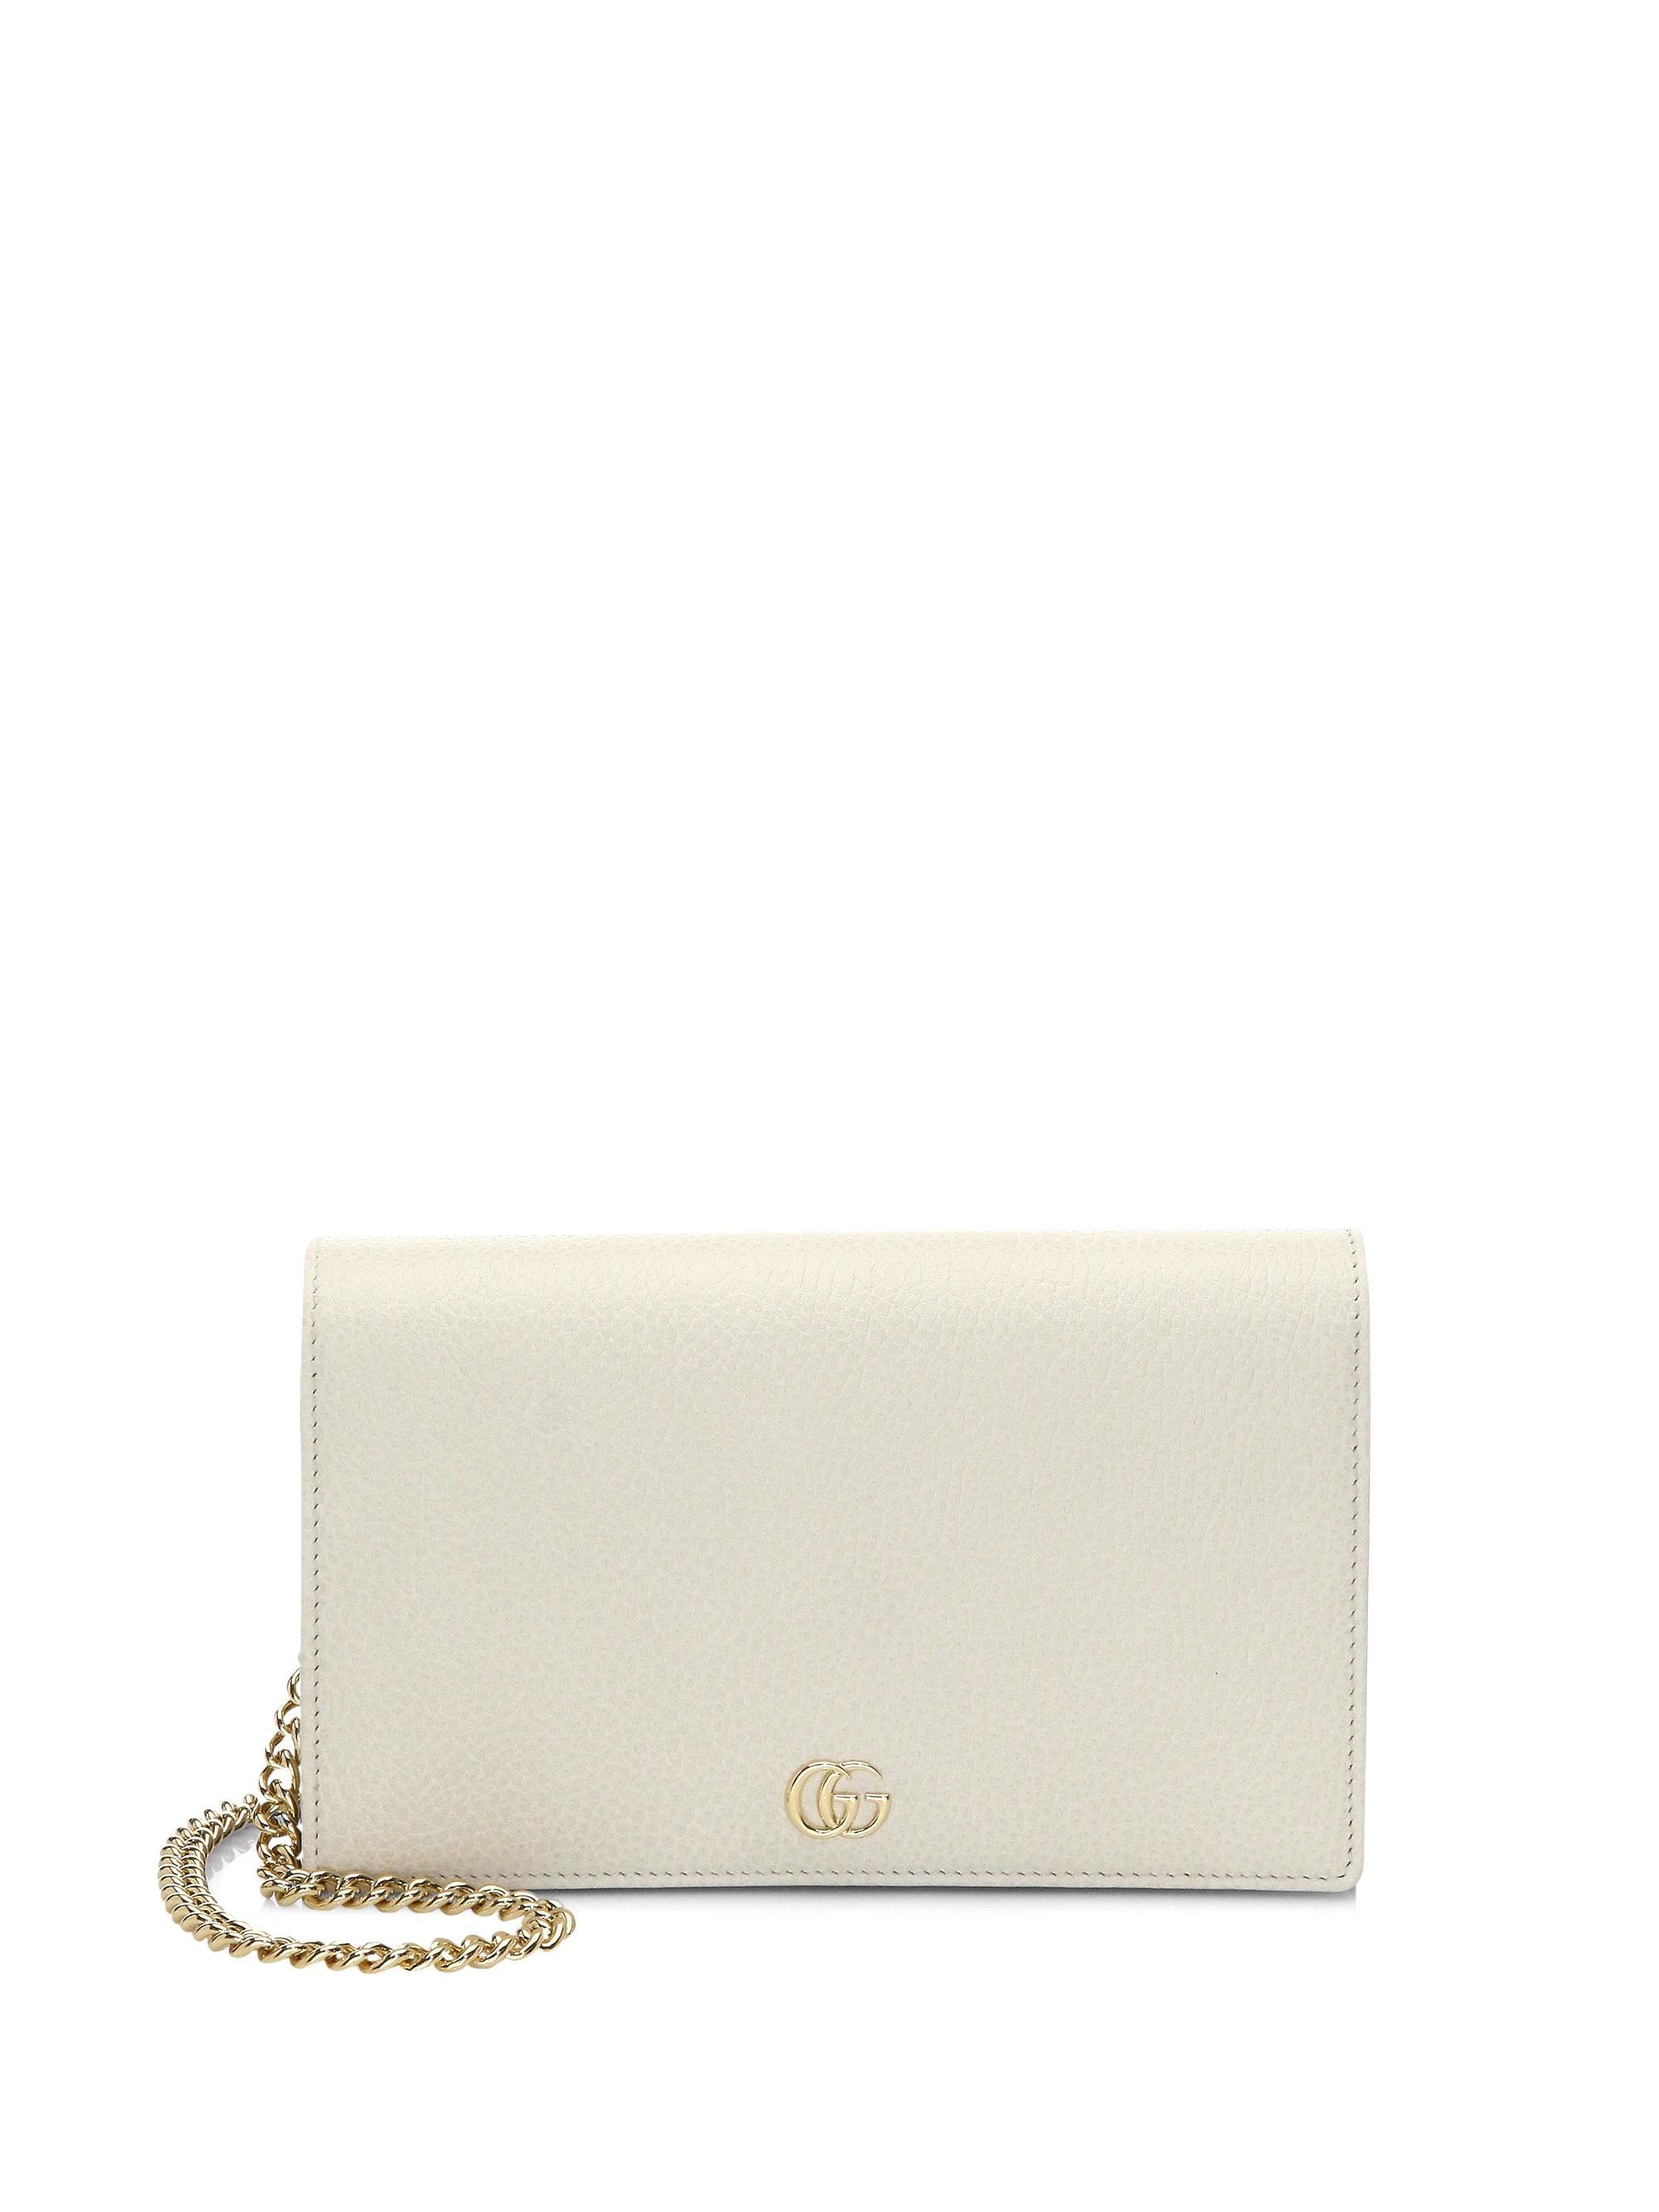 gucci petite gg marmont leather flap wallet on a chain